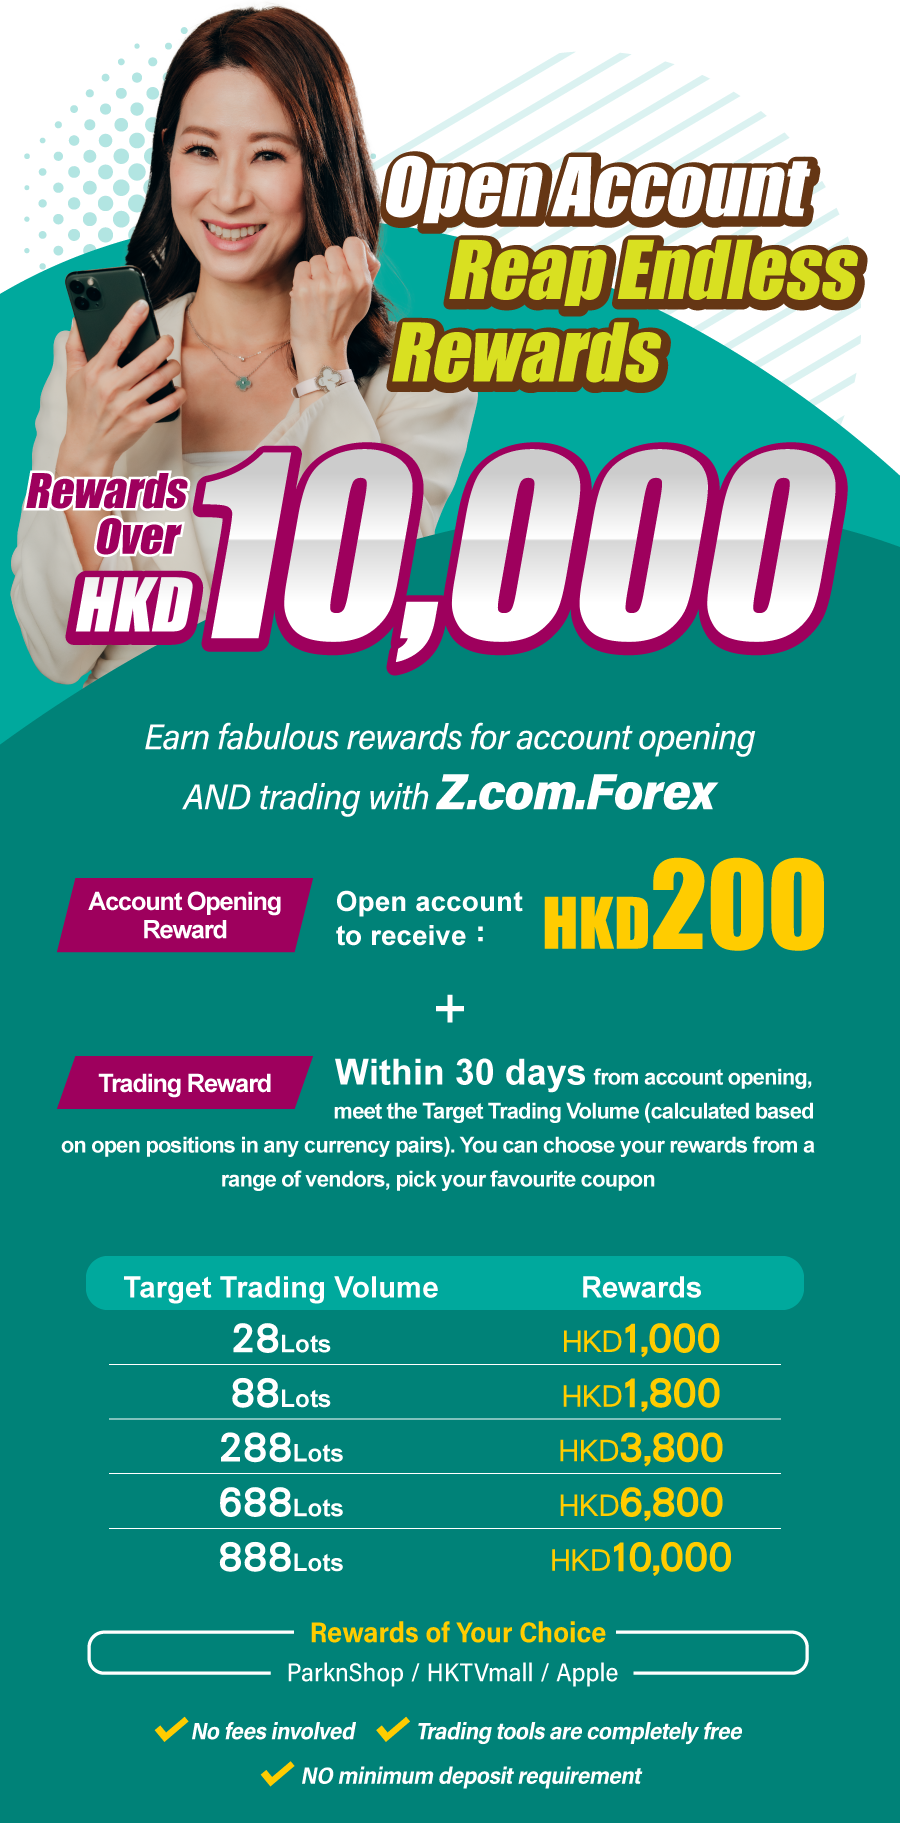 Open Account and Reap Endless Rewards！Rewards Up To HKD10,000